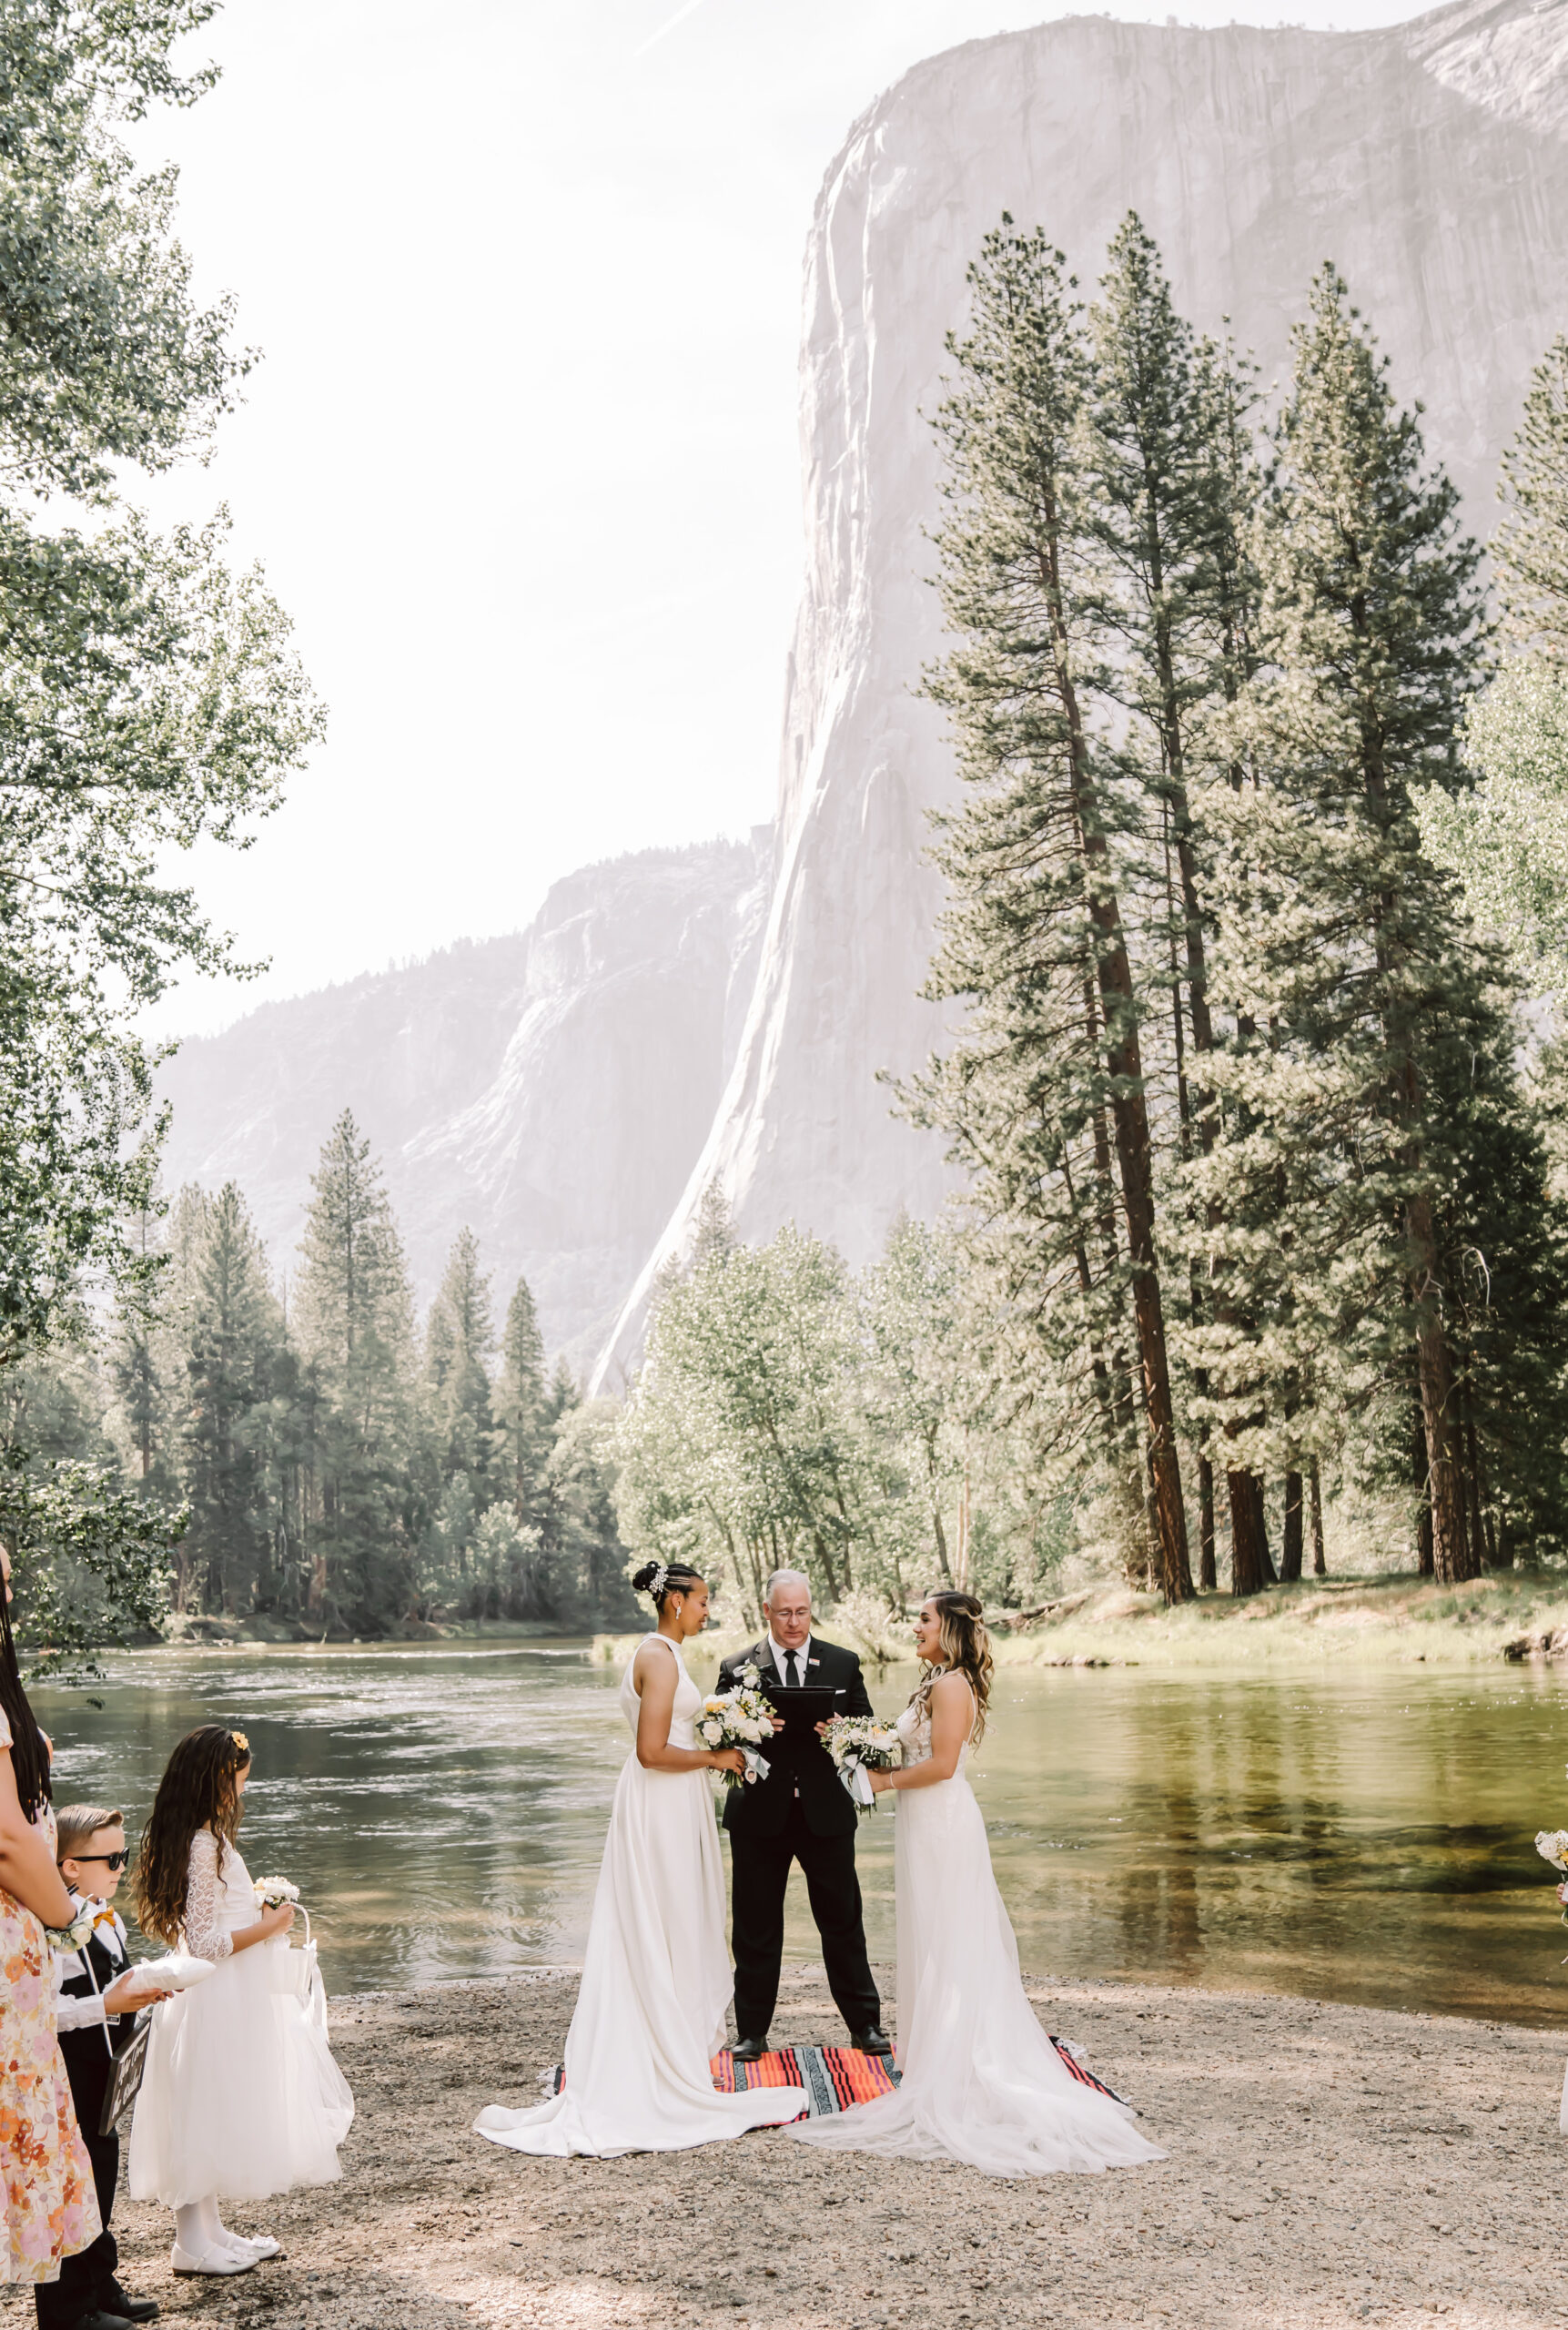 An Elopement ceremony with two ladies in Yosemite Valley